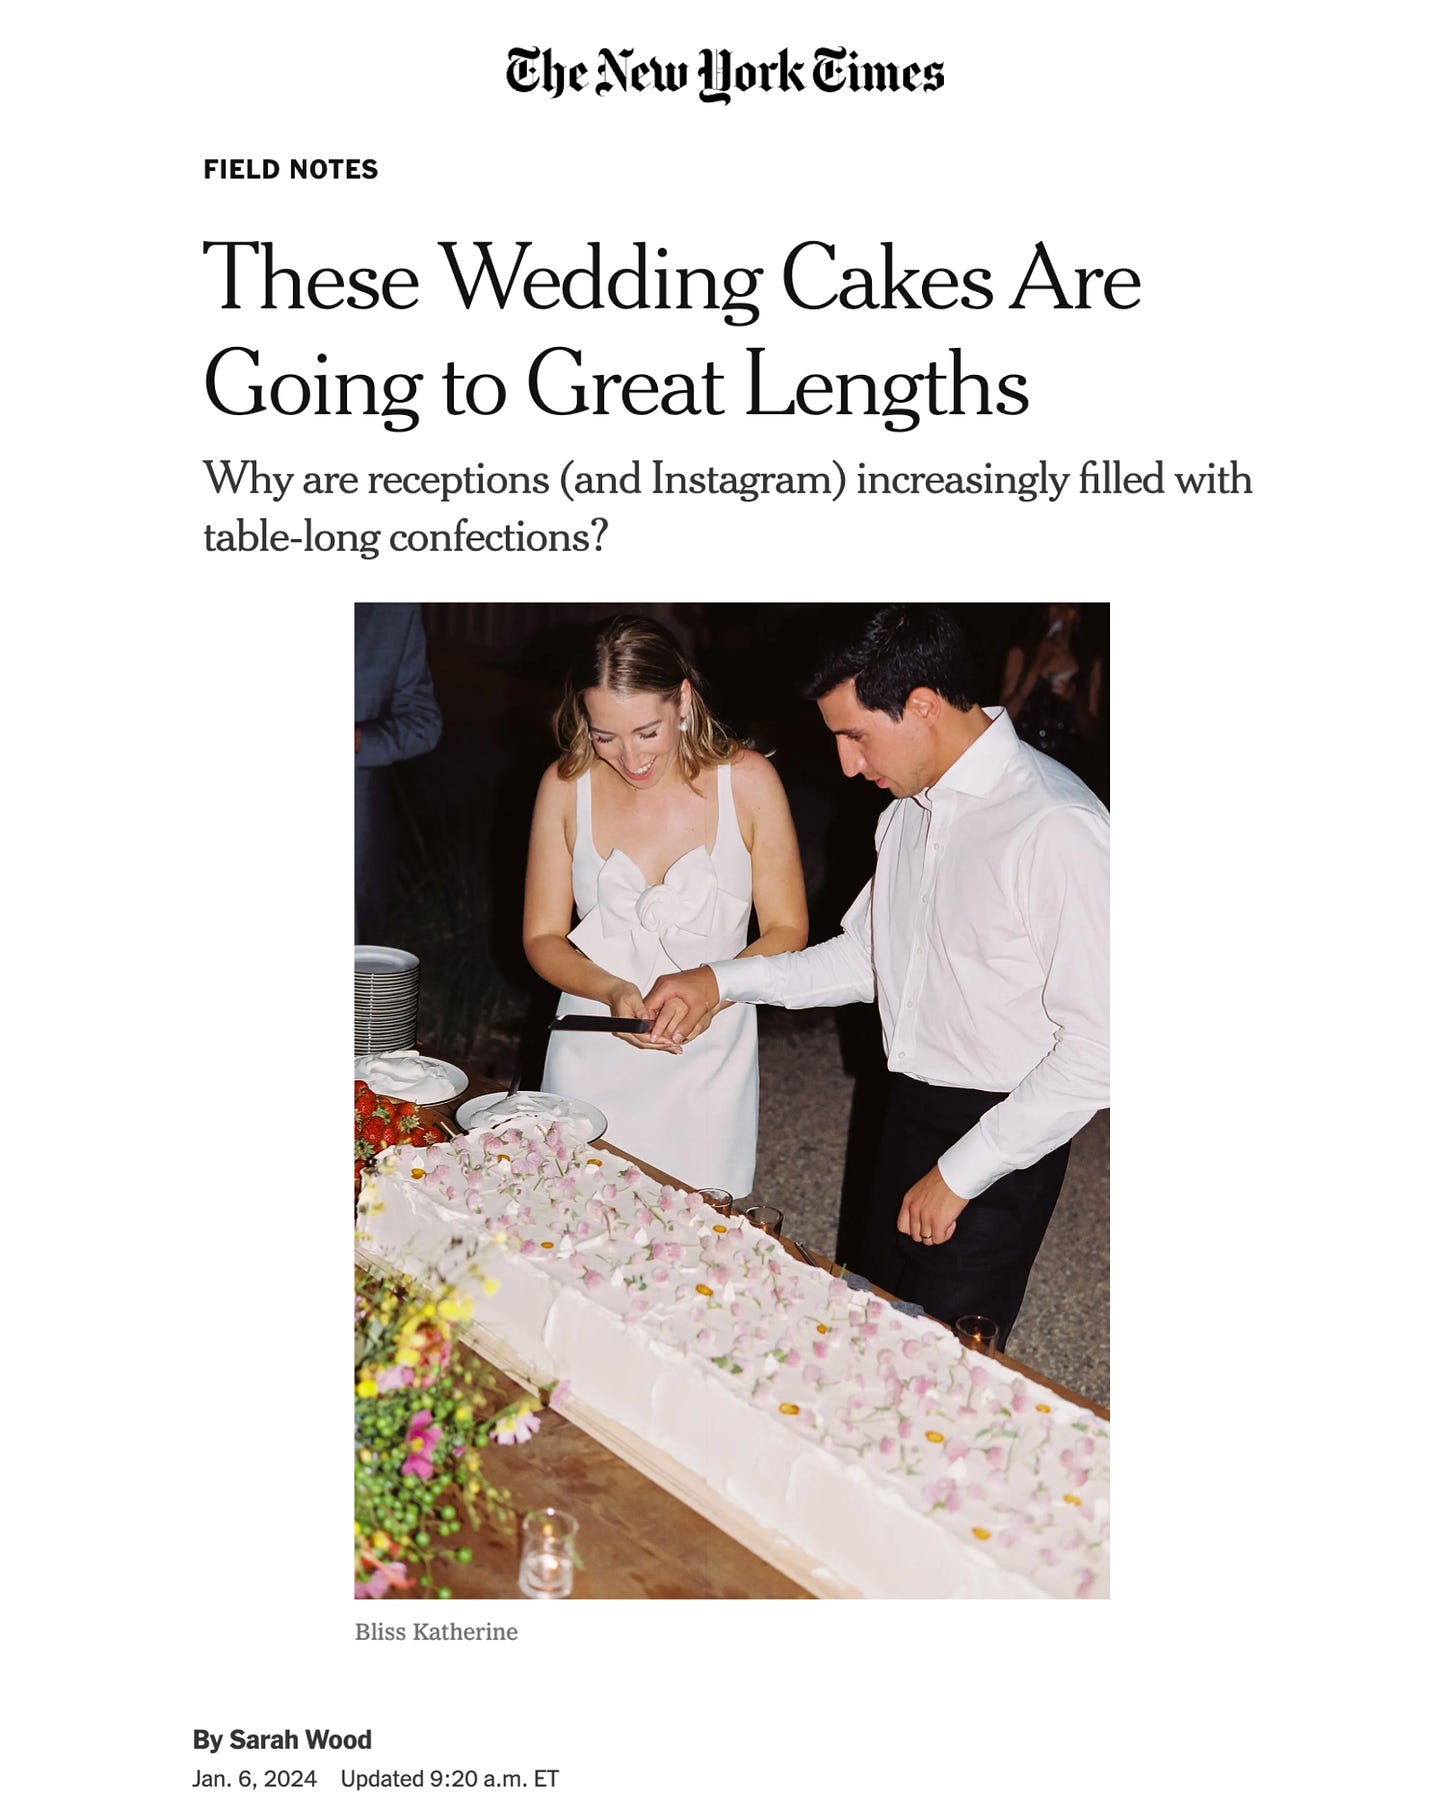 Screenshot of a NY Times article with the headline "These Wedding Cakes Are Going to Great Lengths"